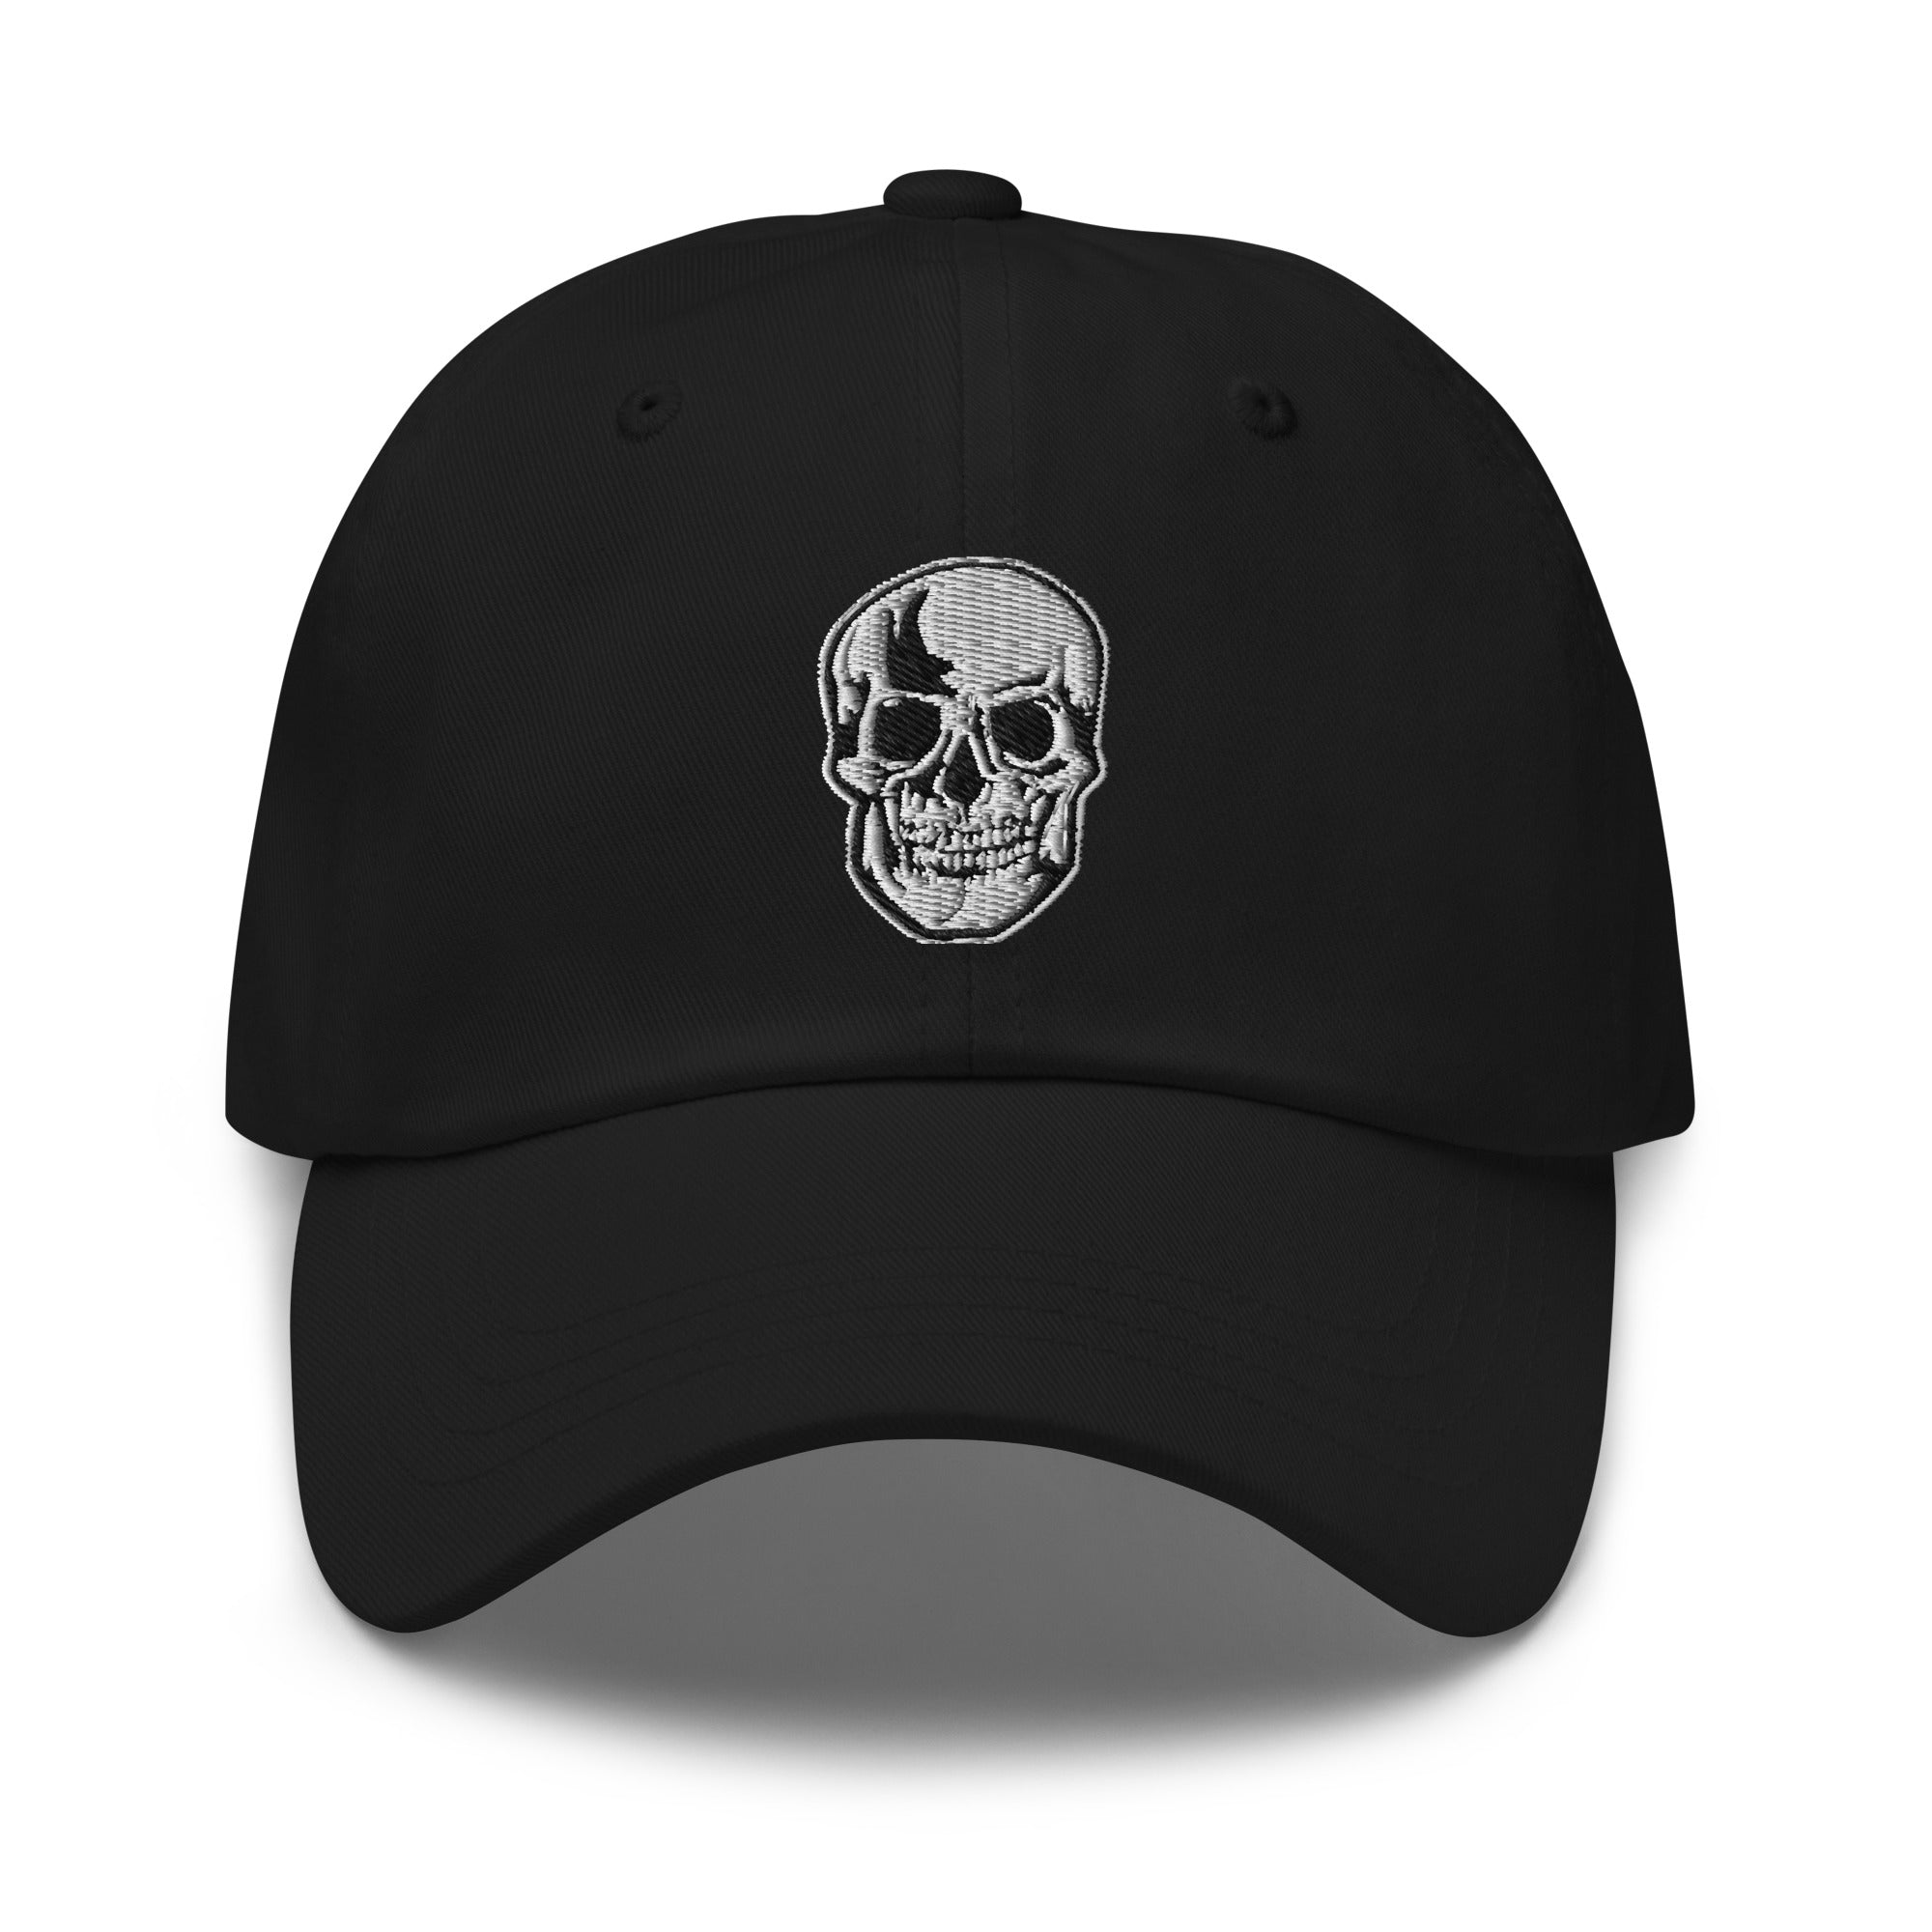 Death Skull Embroidered Baseball Cap Halloween Horror Style Dad hat - Edge of Life Designs